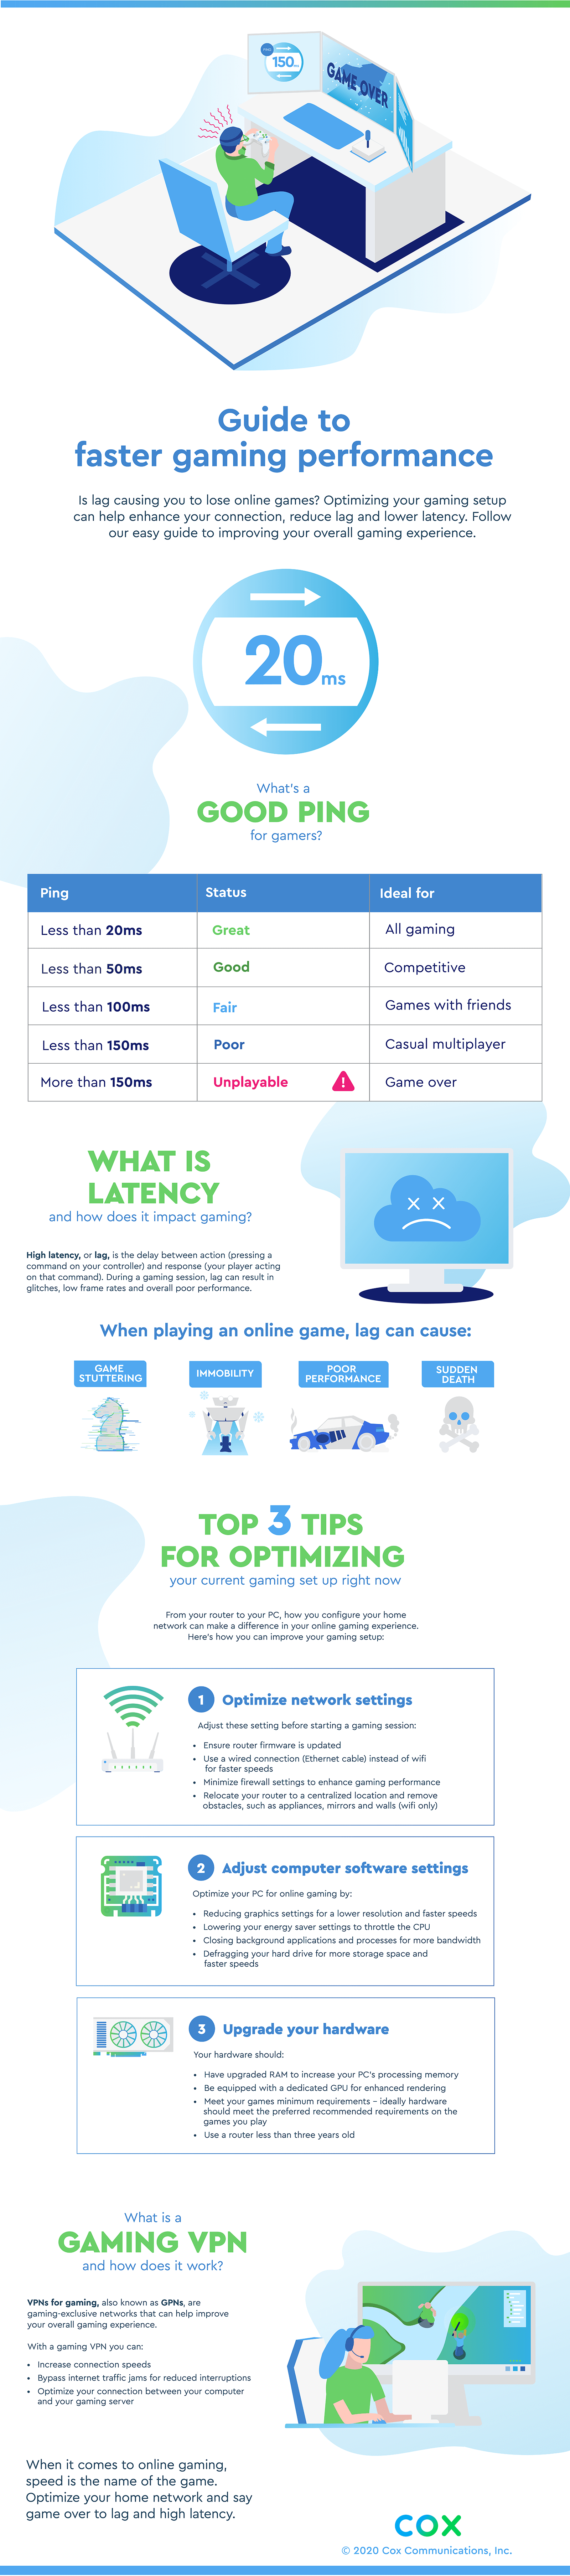 Gamer’s Guide to Better Gaming Performance (infographic)